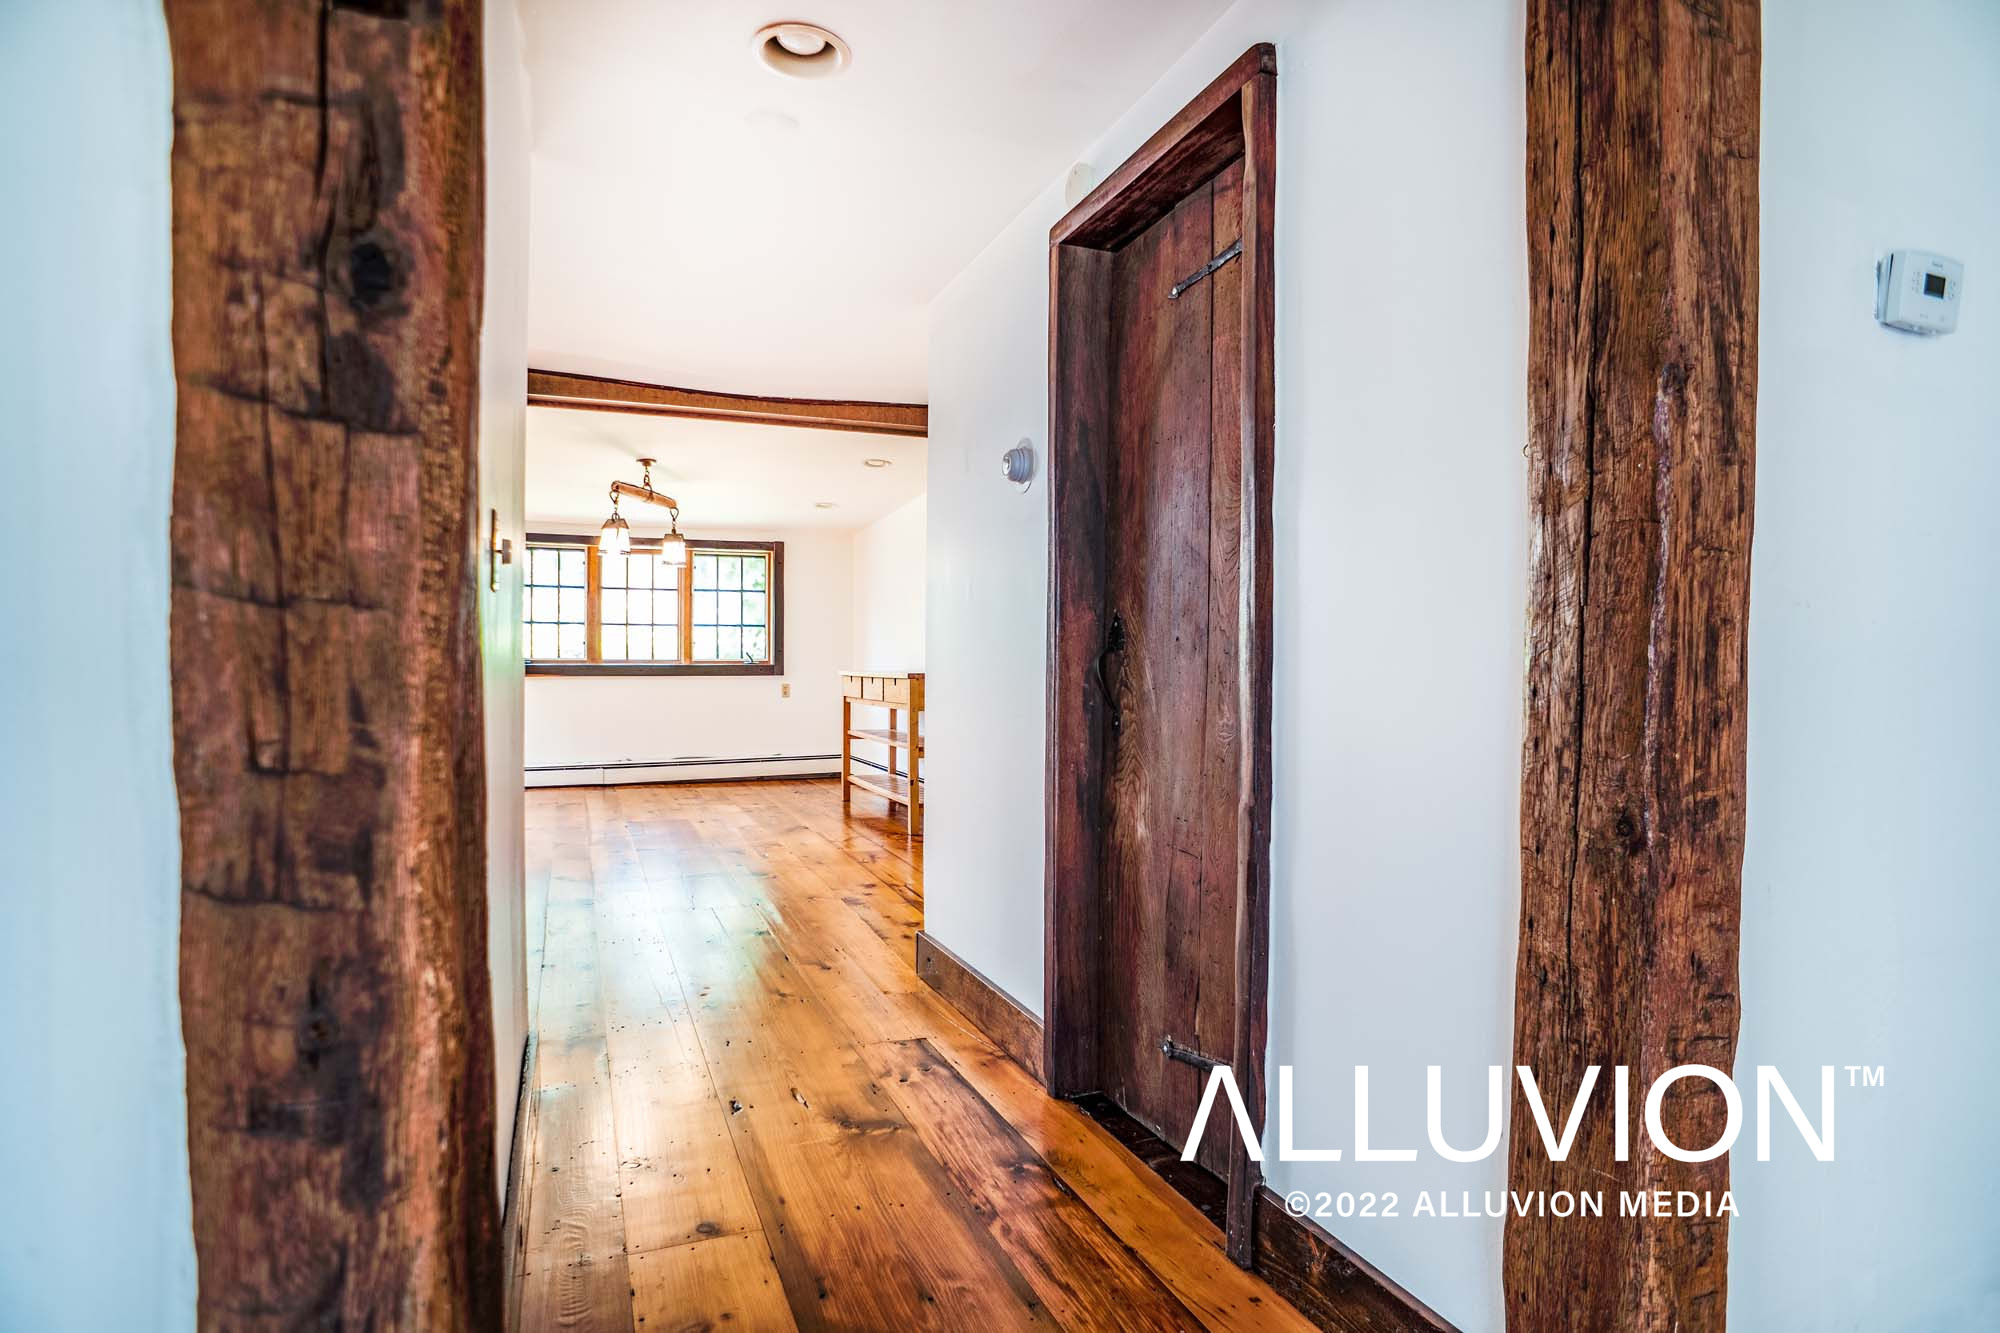 Farmhouse in Garrison, NY – Real Estate Photography Project by Duncan Avenue Studios – Best Real Estate Photographer in Hudson Valley, Catskills, and Westchester, New York